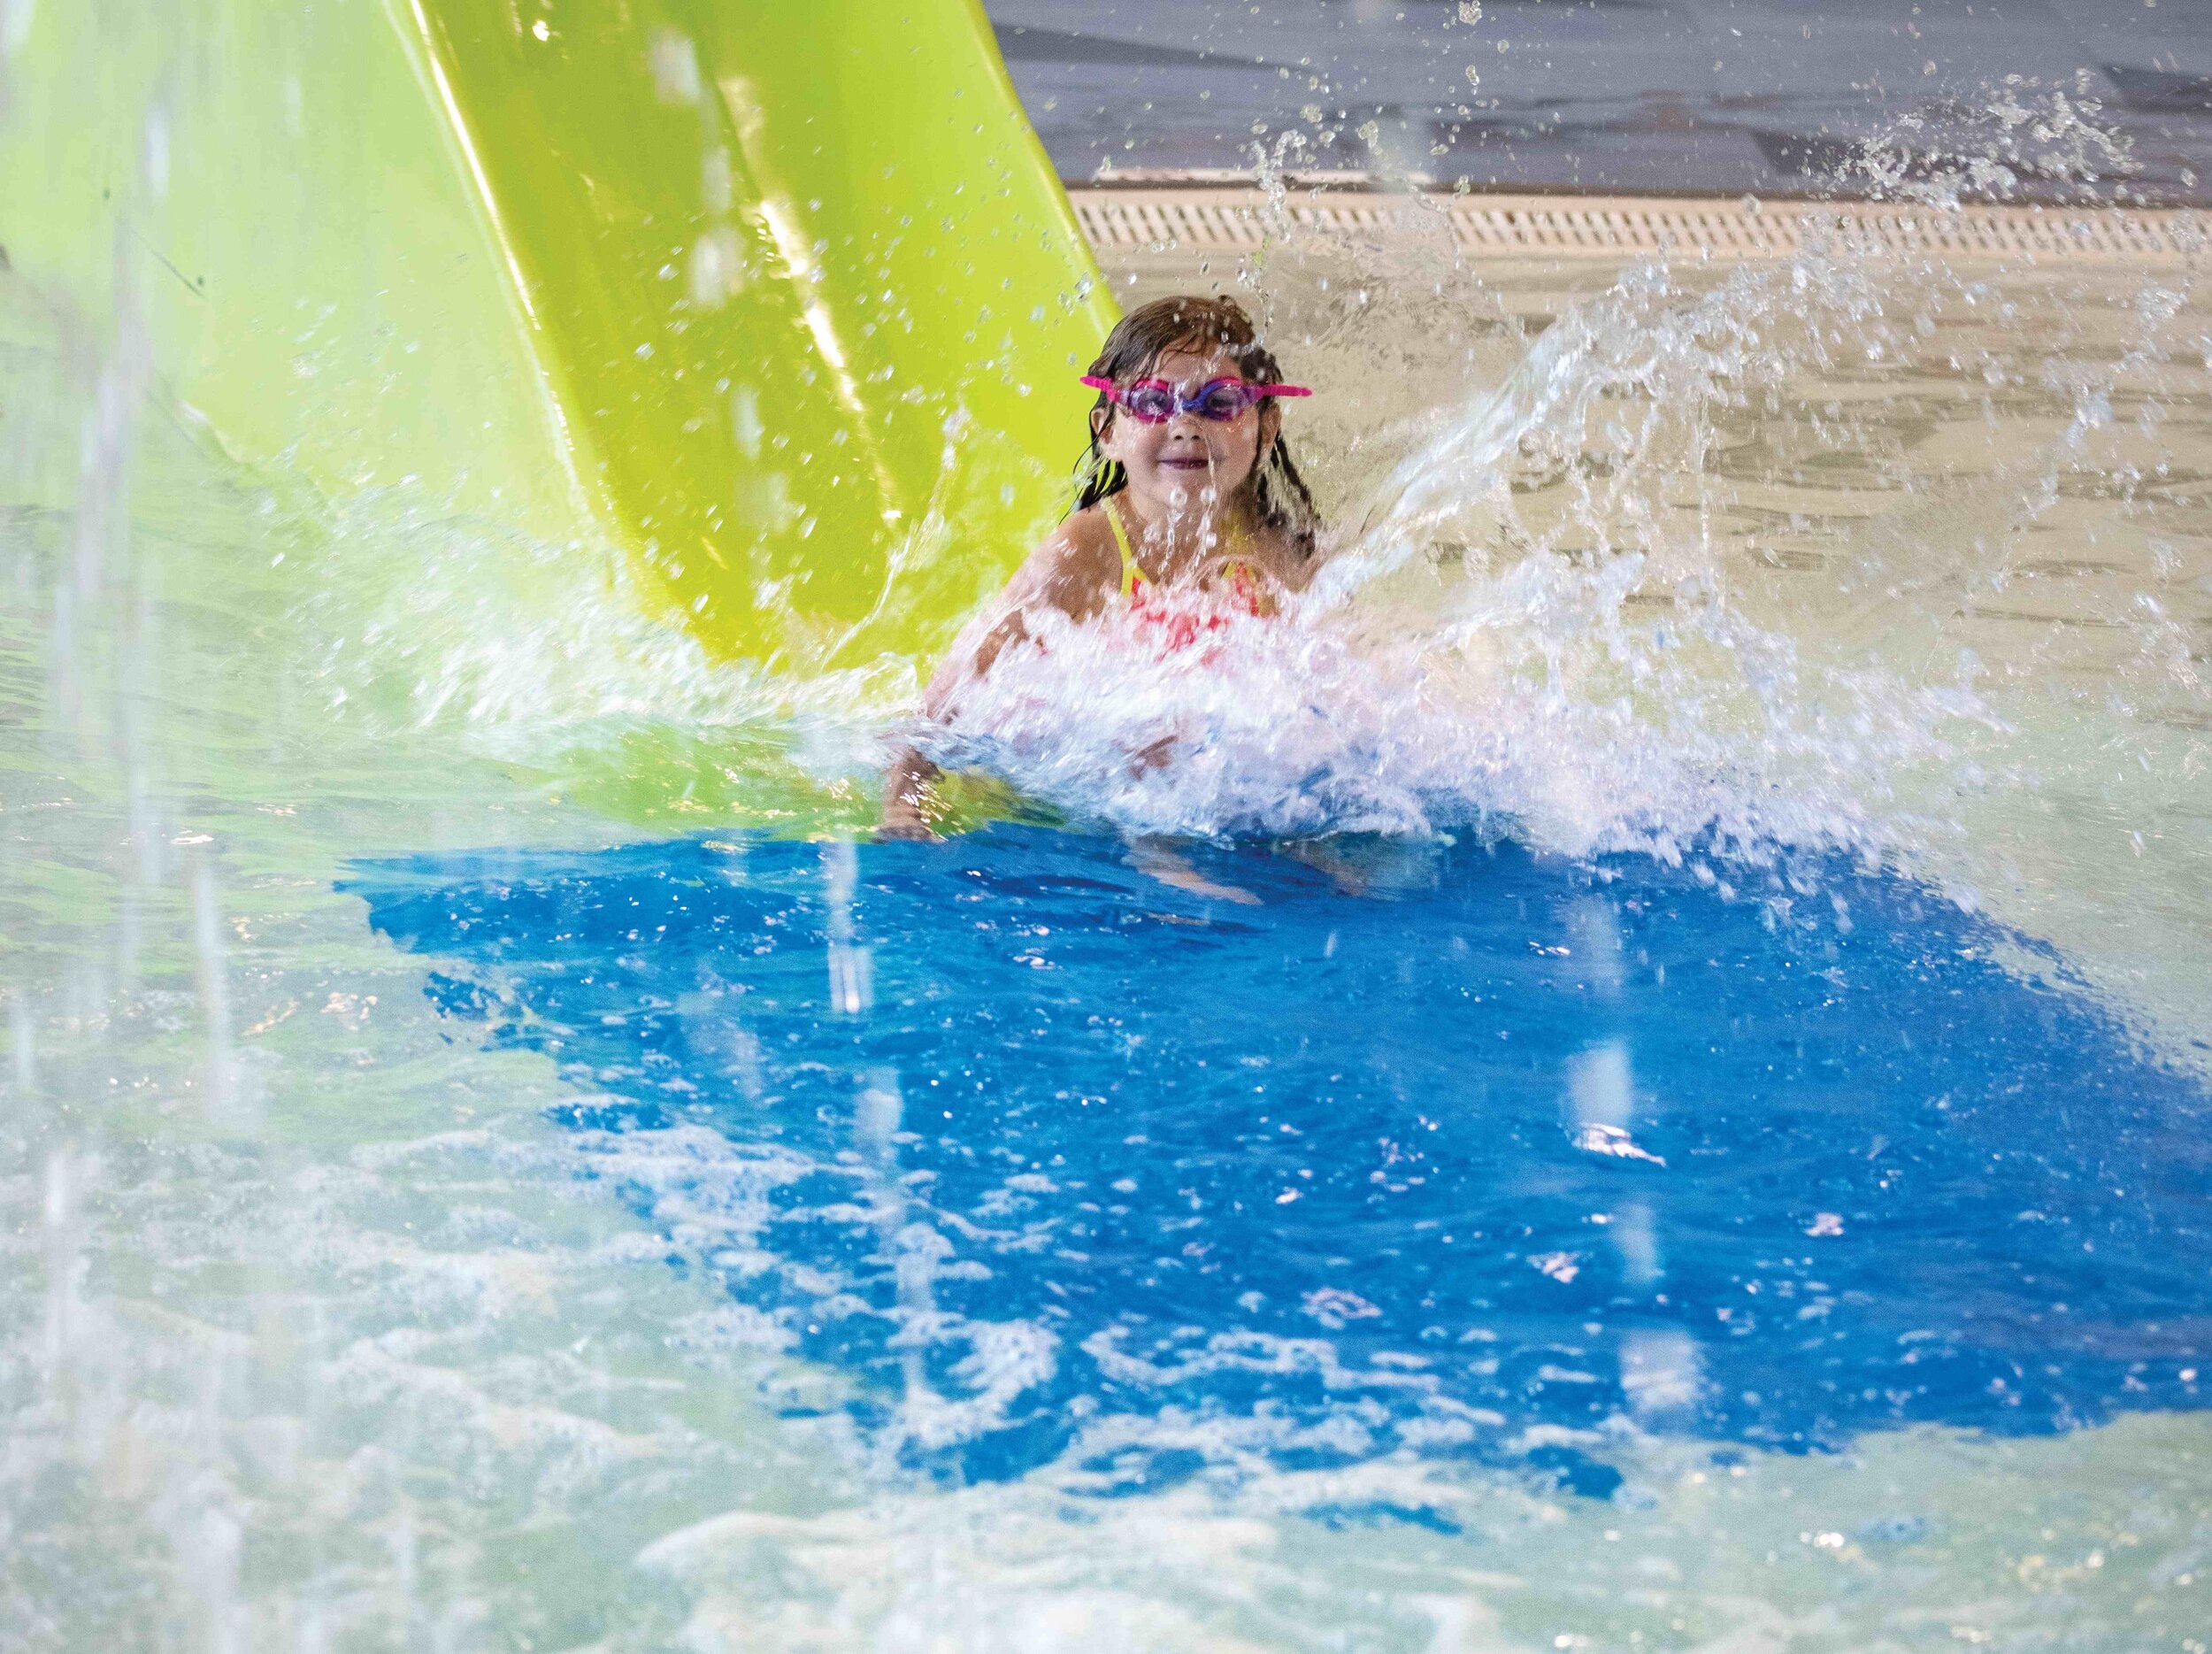 how to make a pool or splash pad safer when lifeguards aren't